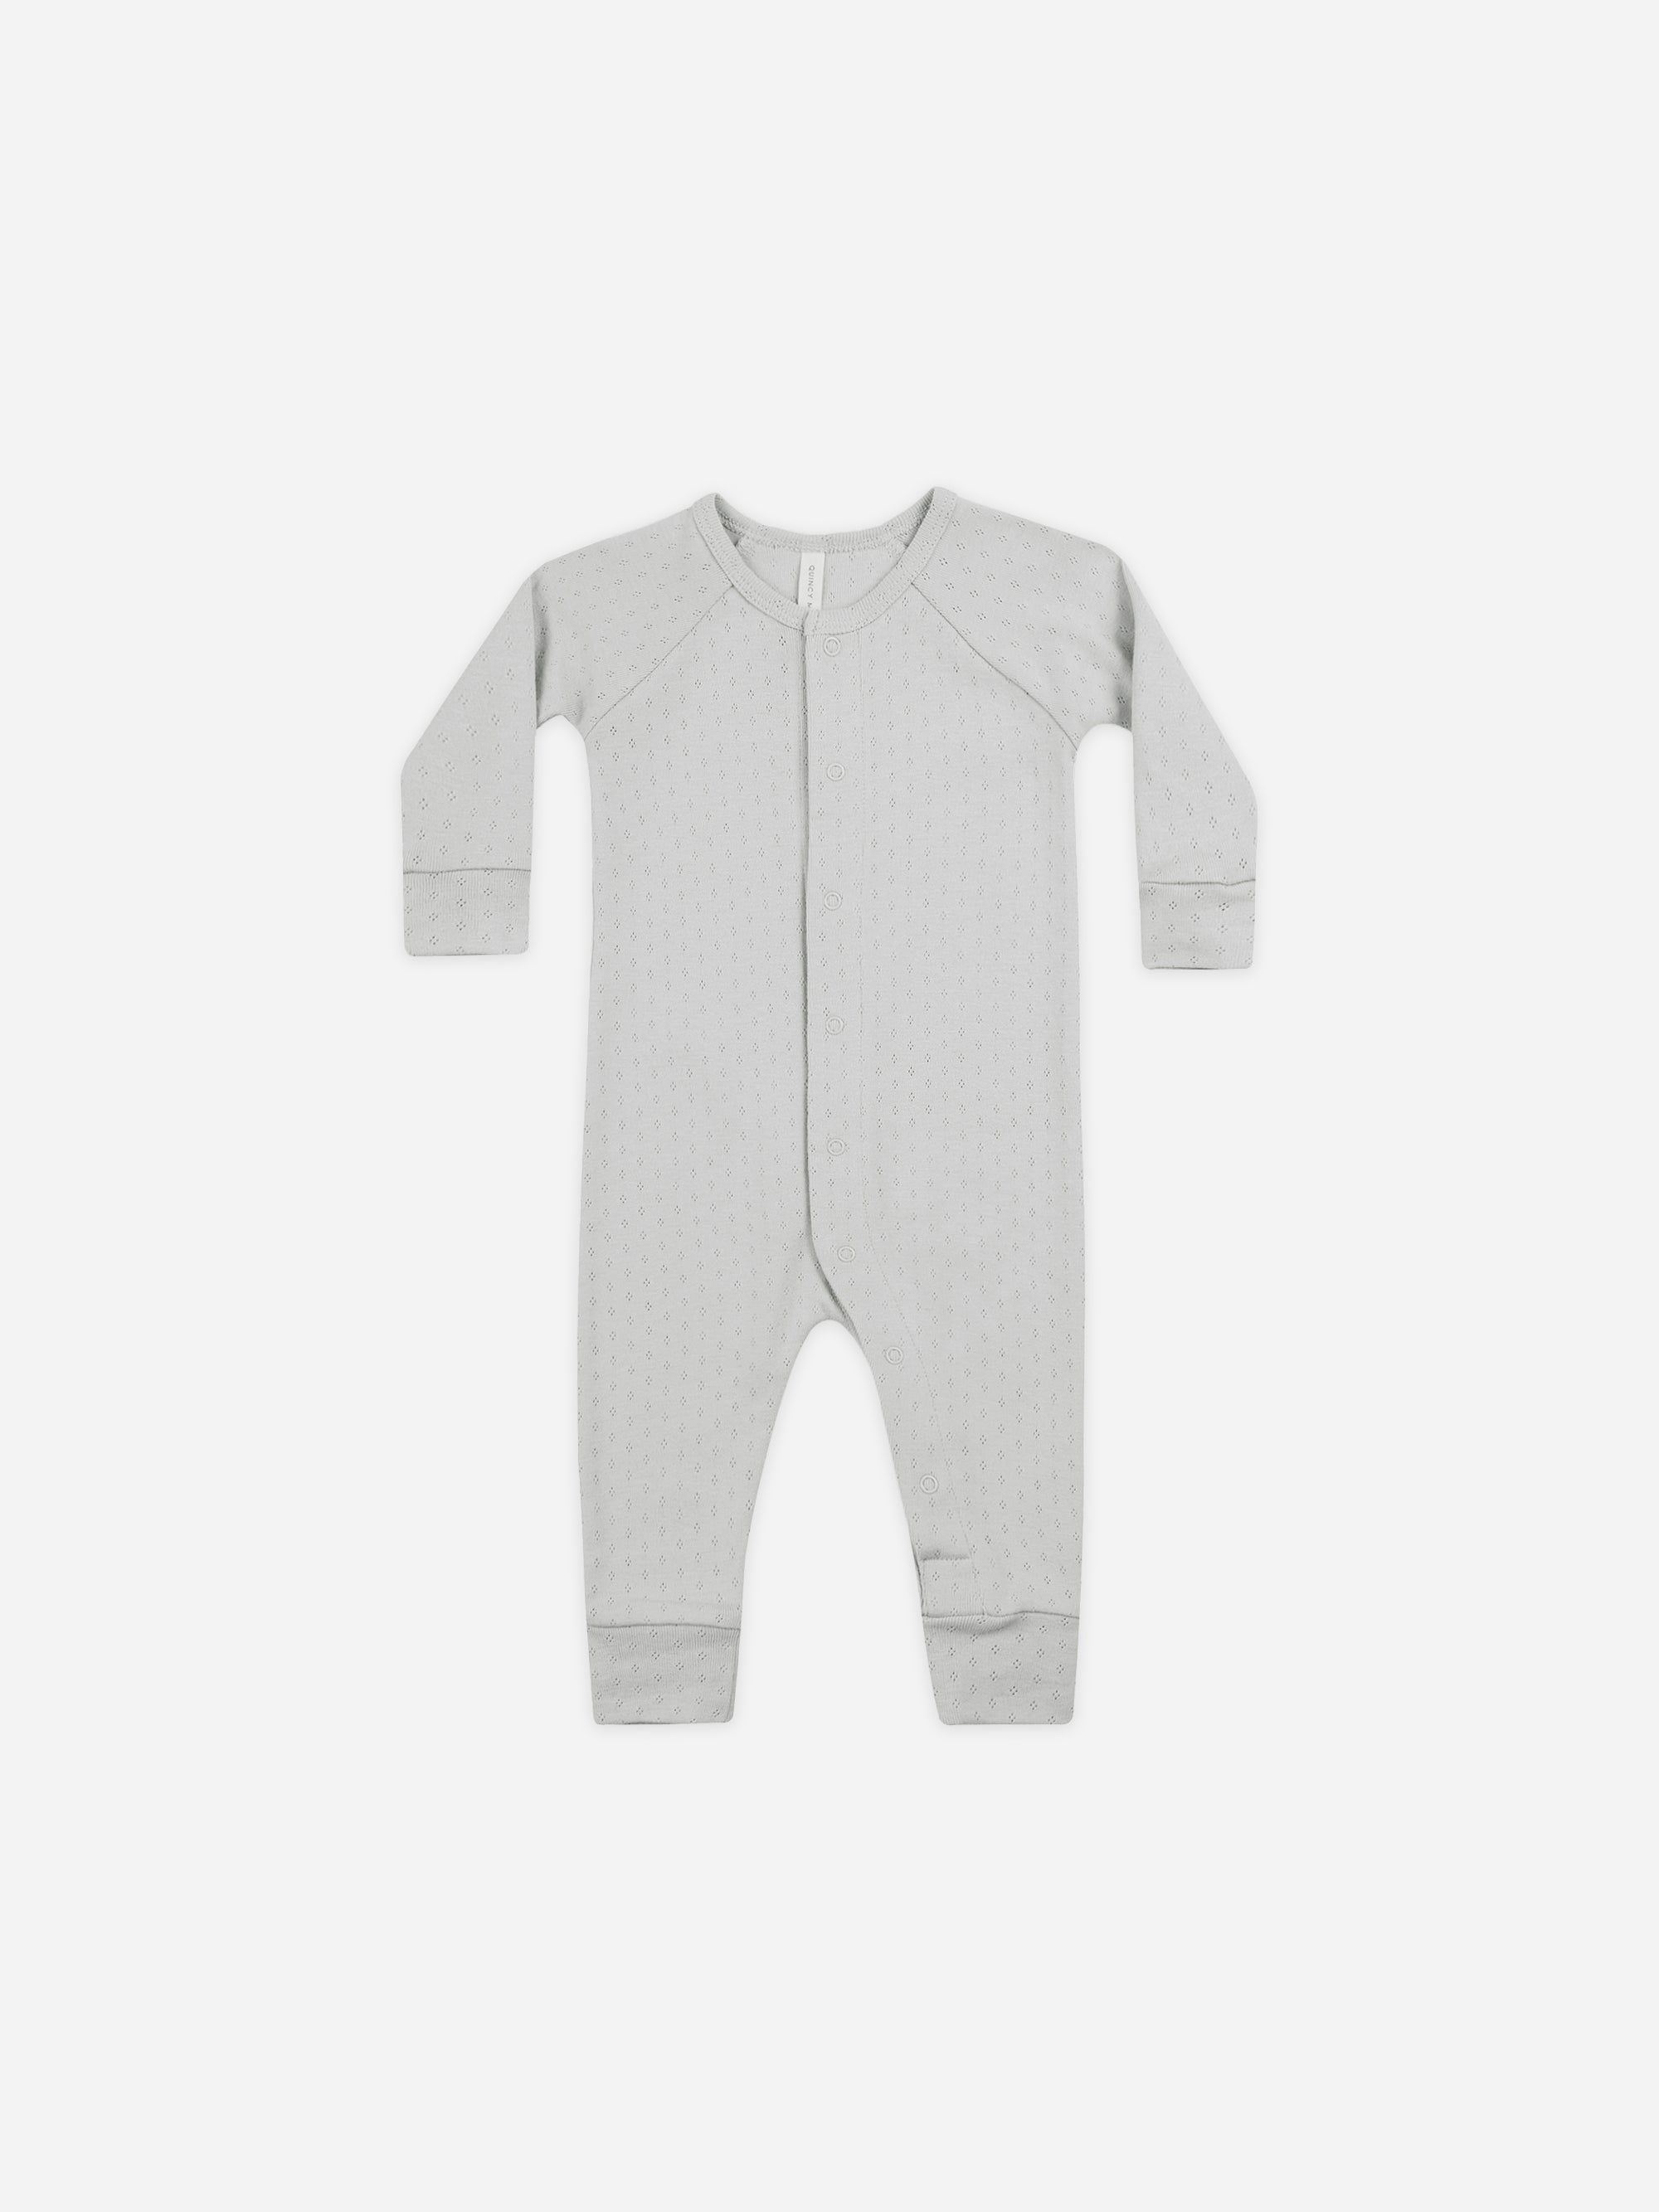 Pointelle Long John || Cloud - Rylee + Cru | Kids Clothes | Trendy Baby Clothes | Modern Infant Outfits |